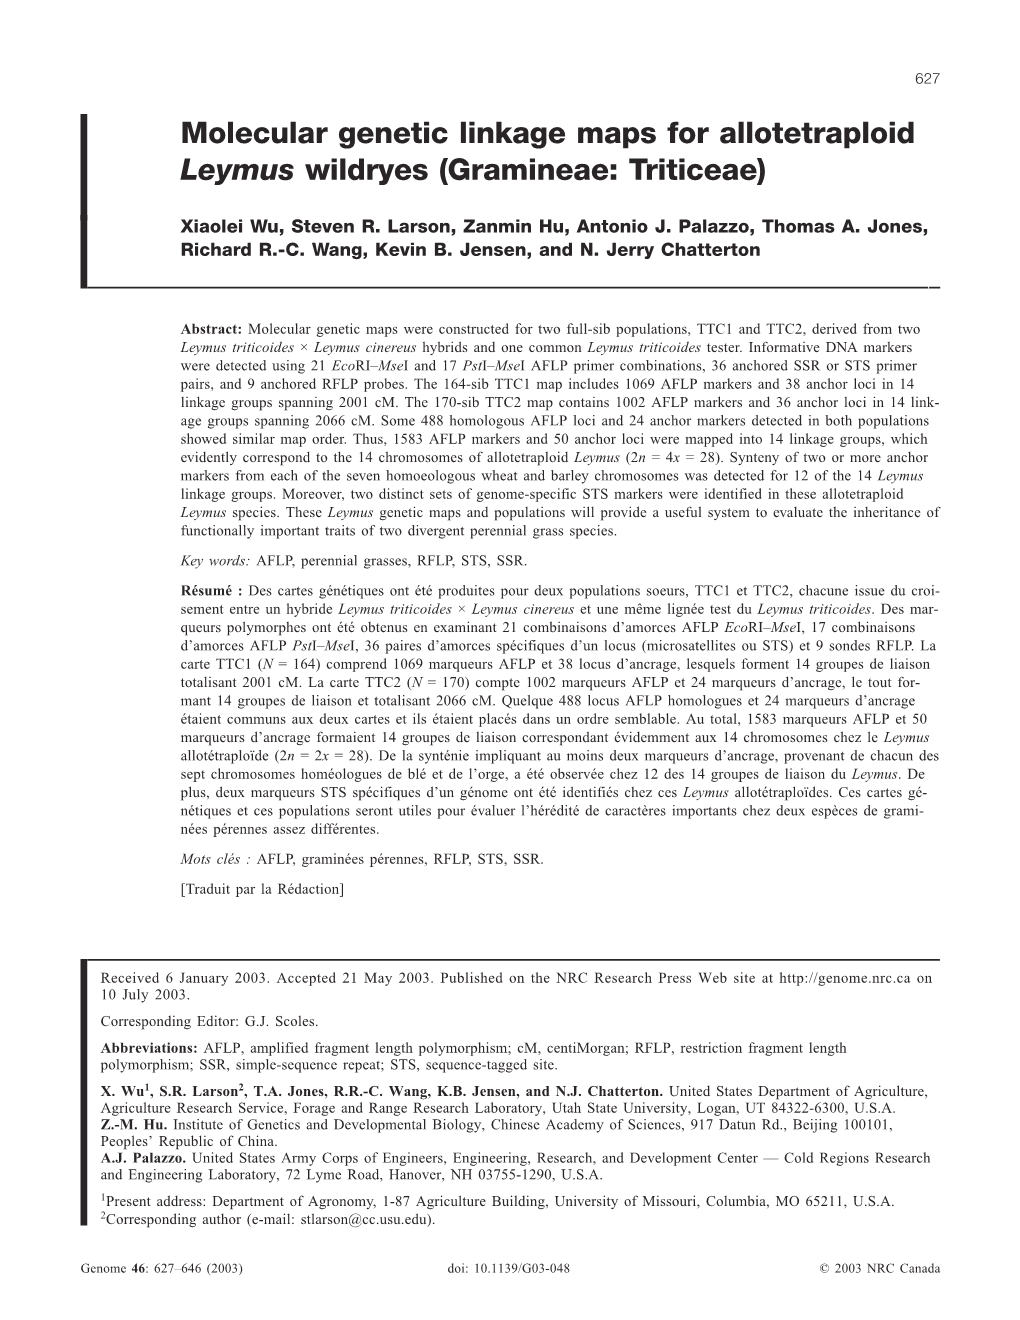 Molecular Genetic Linkage Maps for Allotetraploid Leymus Wildryes (Gramineae: Triticeae)